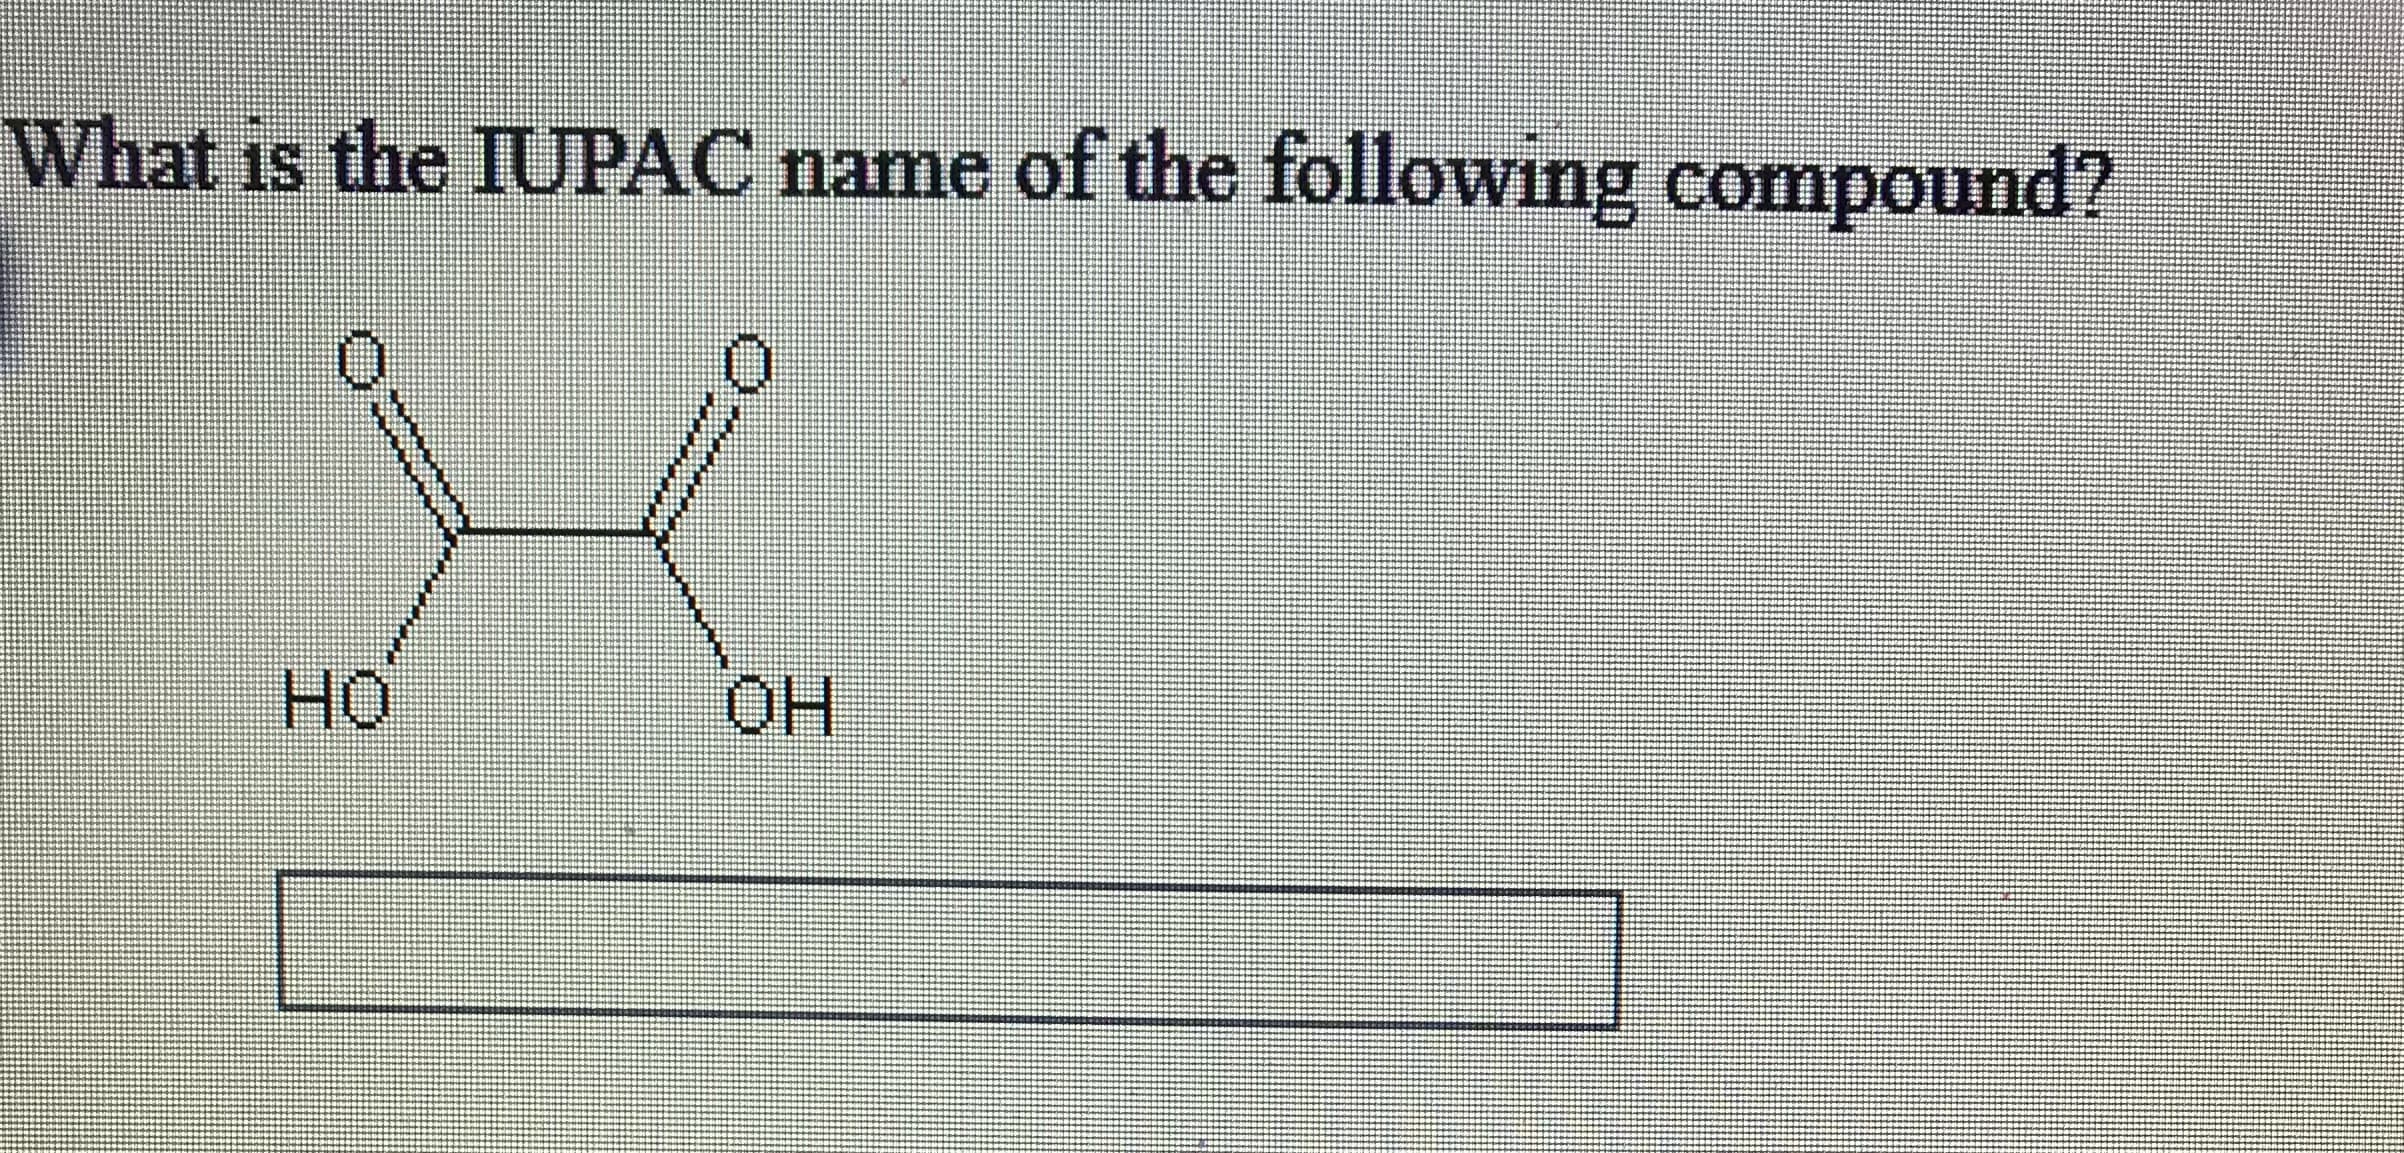 What is the IUPAC name of the following compound?
HO
HO.
